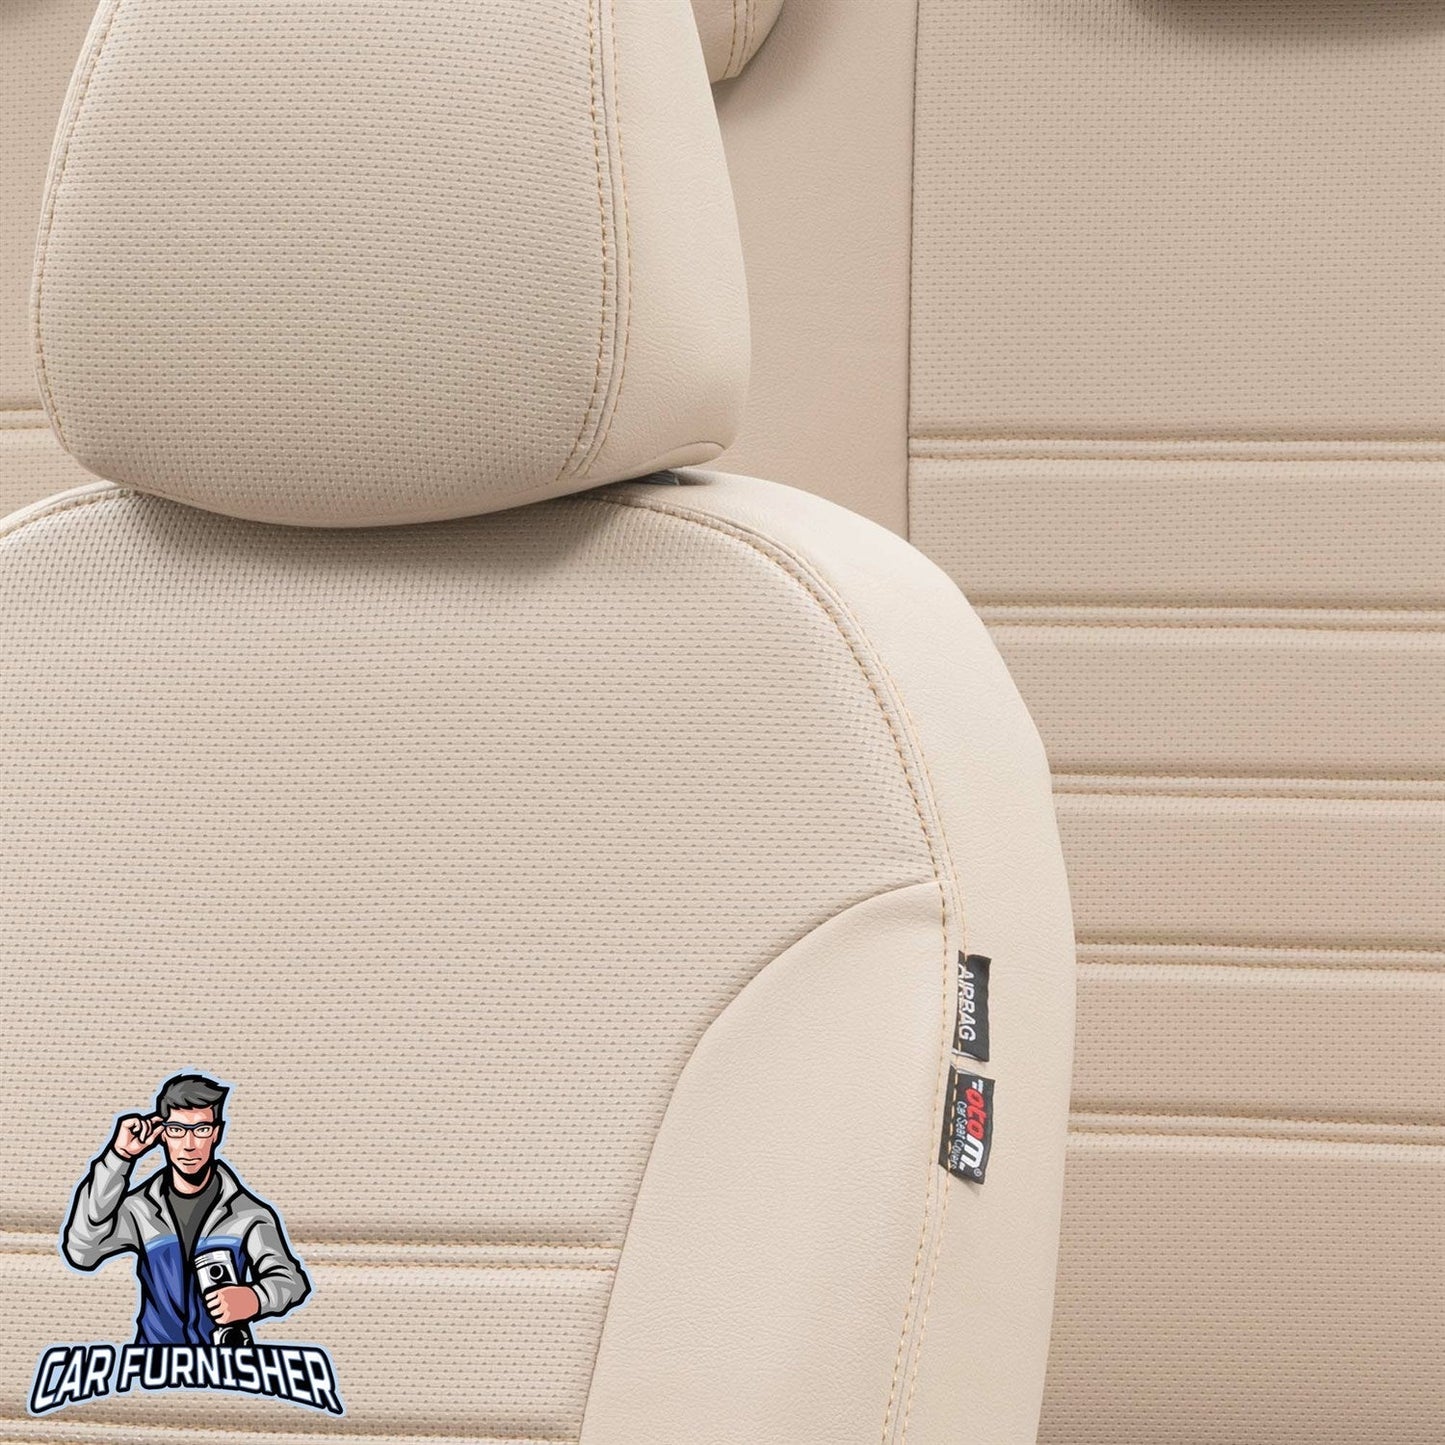 Renault Master Seat Covers New York Leather Design Beige Leather